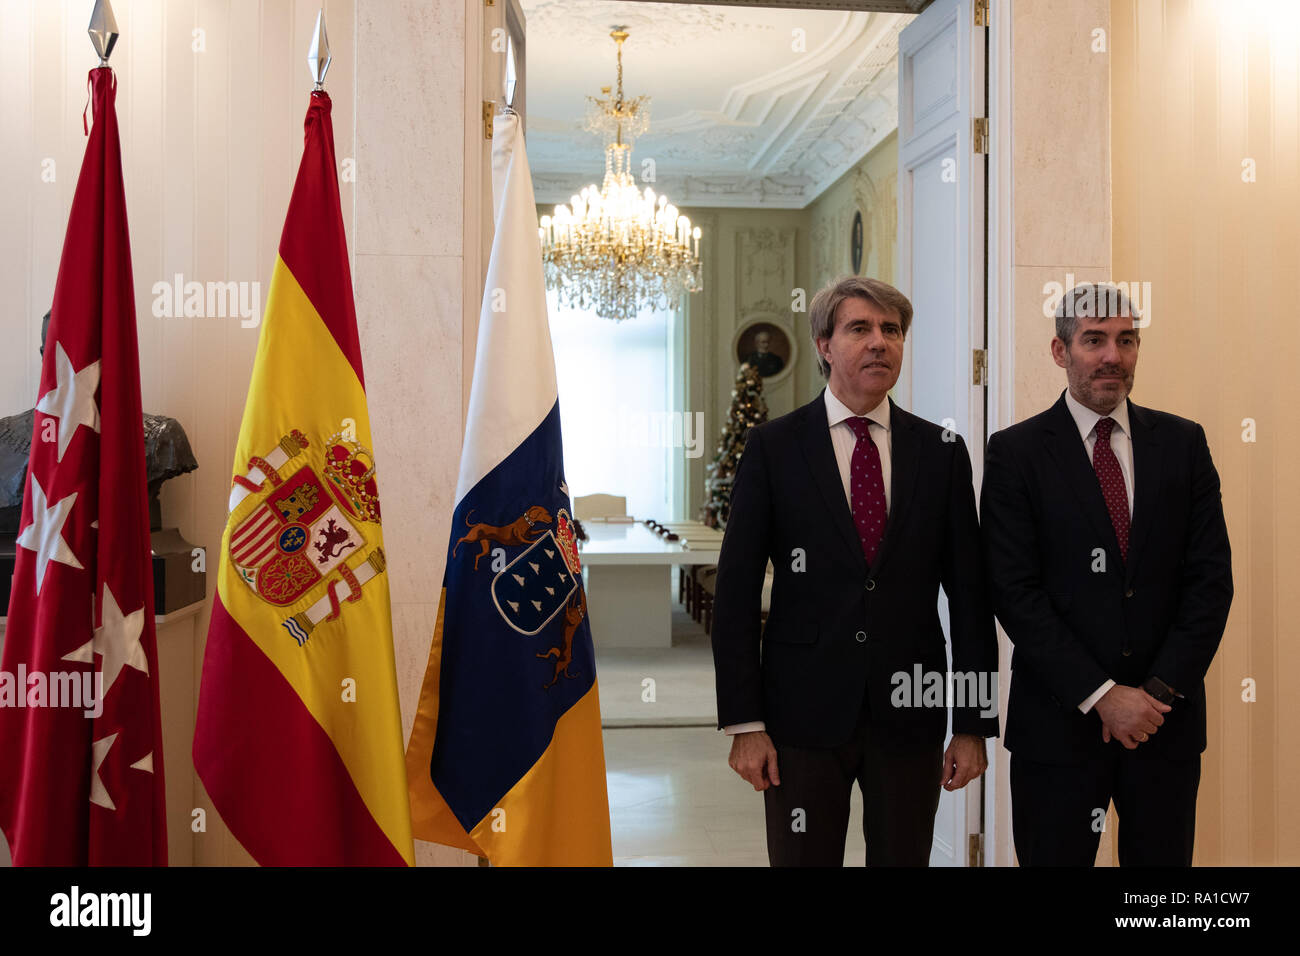 Madrid, Spain. 30th December 2018. ANGEL GARRIDO(left), The President of the Community of Madrid and FERNANDO CLAVIJO, The President of the Community of the Canary Islands. The president of the Community of Madrid, Ángel Garrido, has met with his Canarian counterpart, Fernando Clavijo, to review the latest preparations for the New Year bells, which tomorrow will offer the clock of Puerta del Sol and this year will sound also in the Canary spindle on Dec 30, 2018 in Madrid, Spain Credit: Jesús Hellin/Alamy Live News Stock Photo